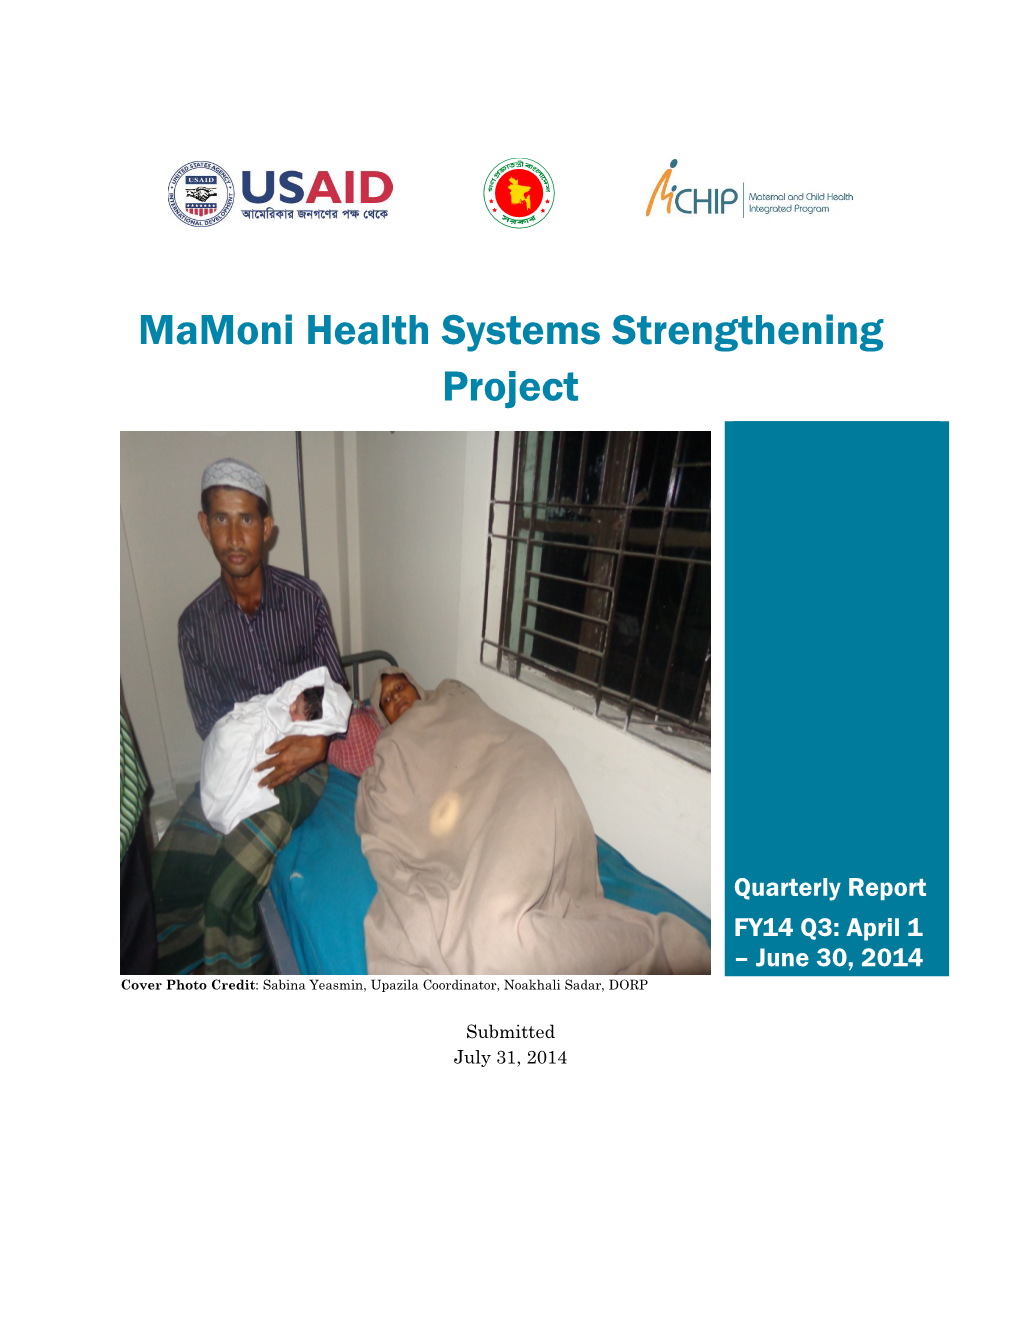 Mamoni Health Systems Strengthening Project